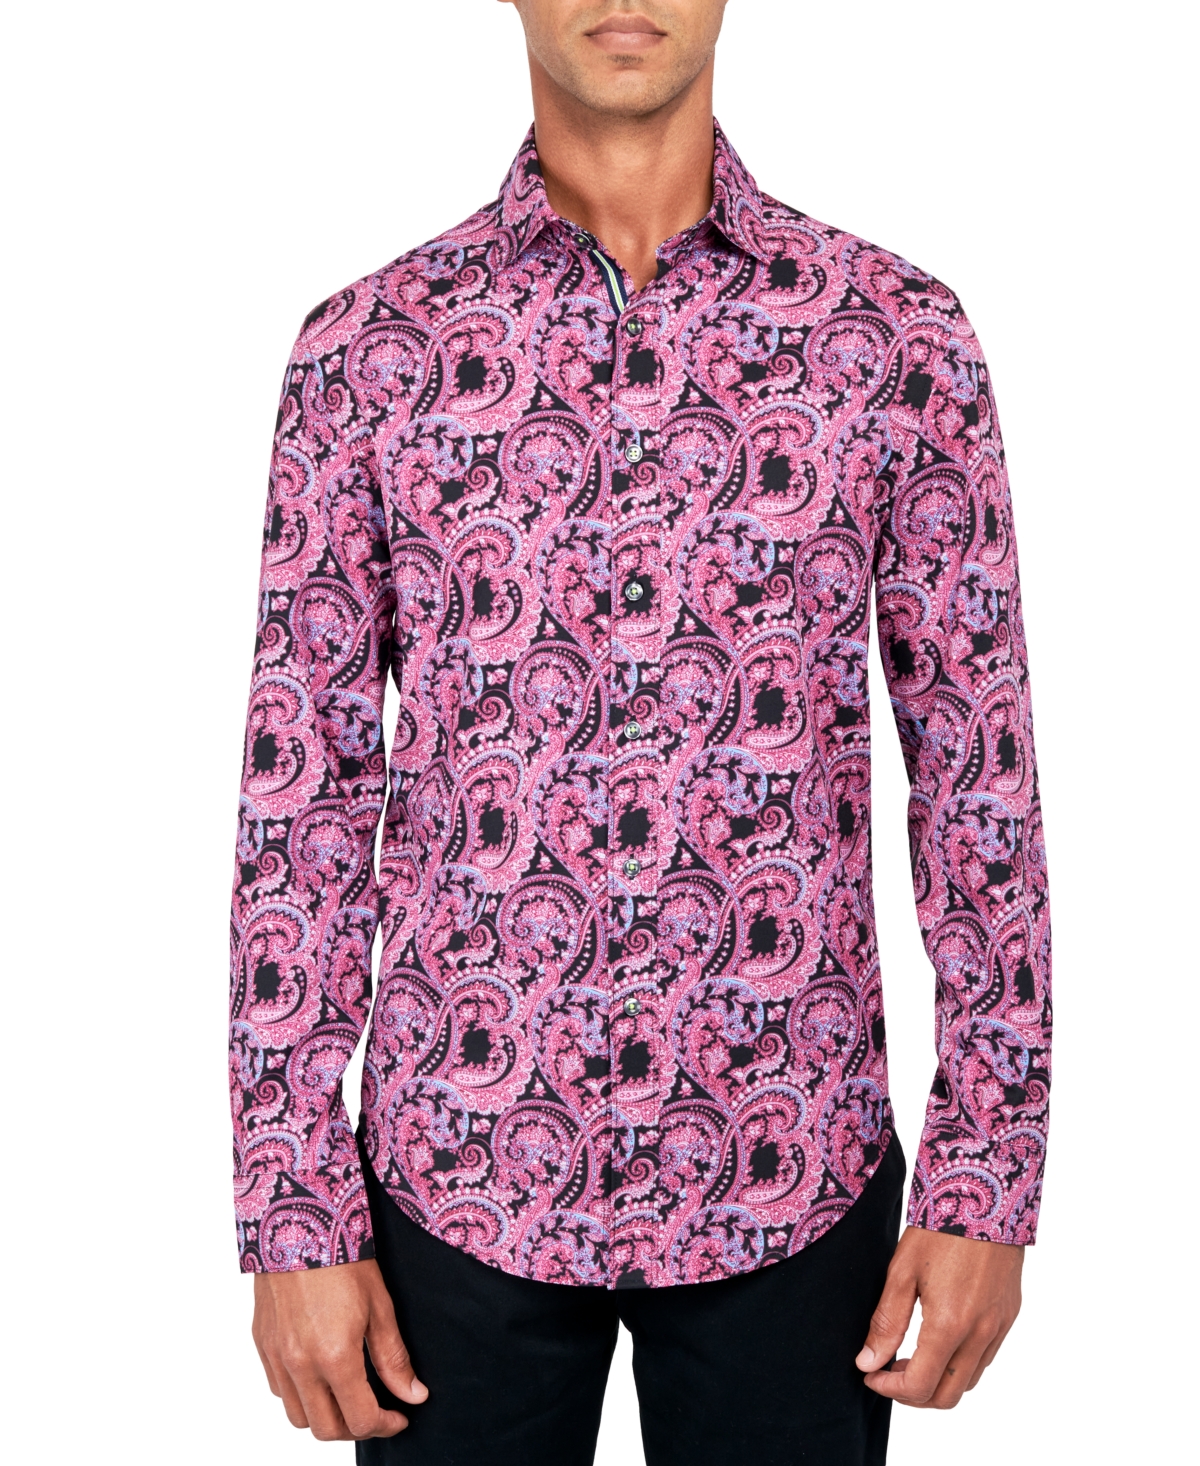 Men's Regular-Fit Non-Iron Performance Stretch Paisley Button-Down Shirt - Red